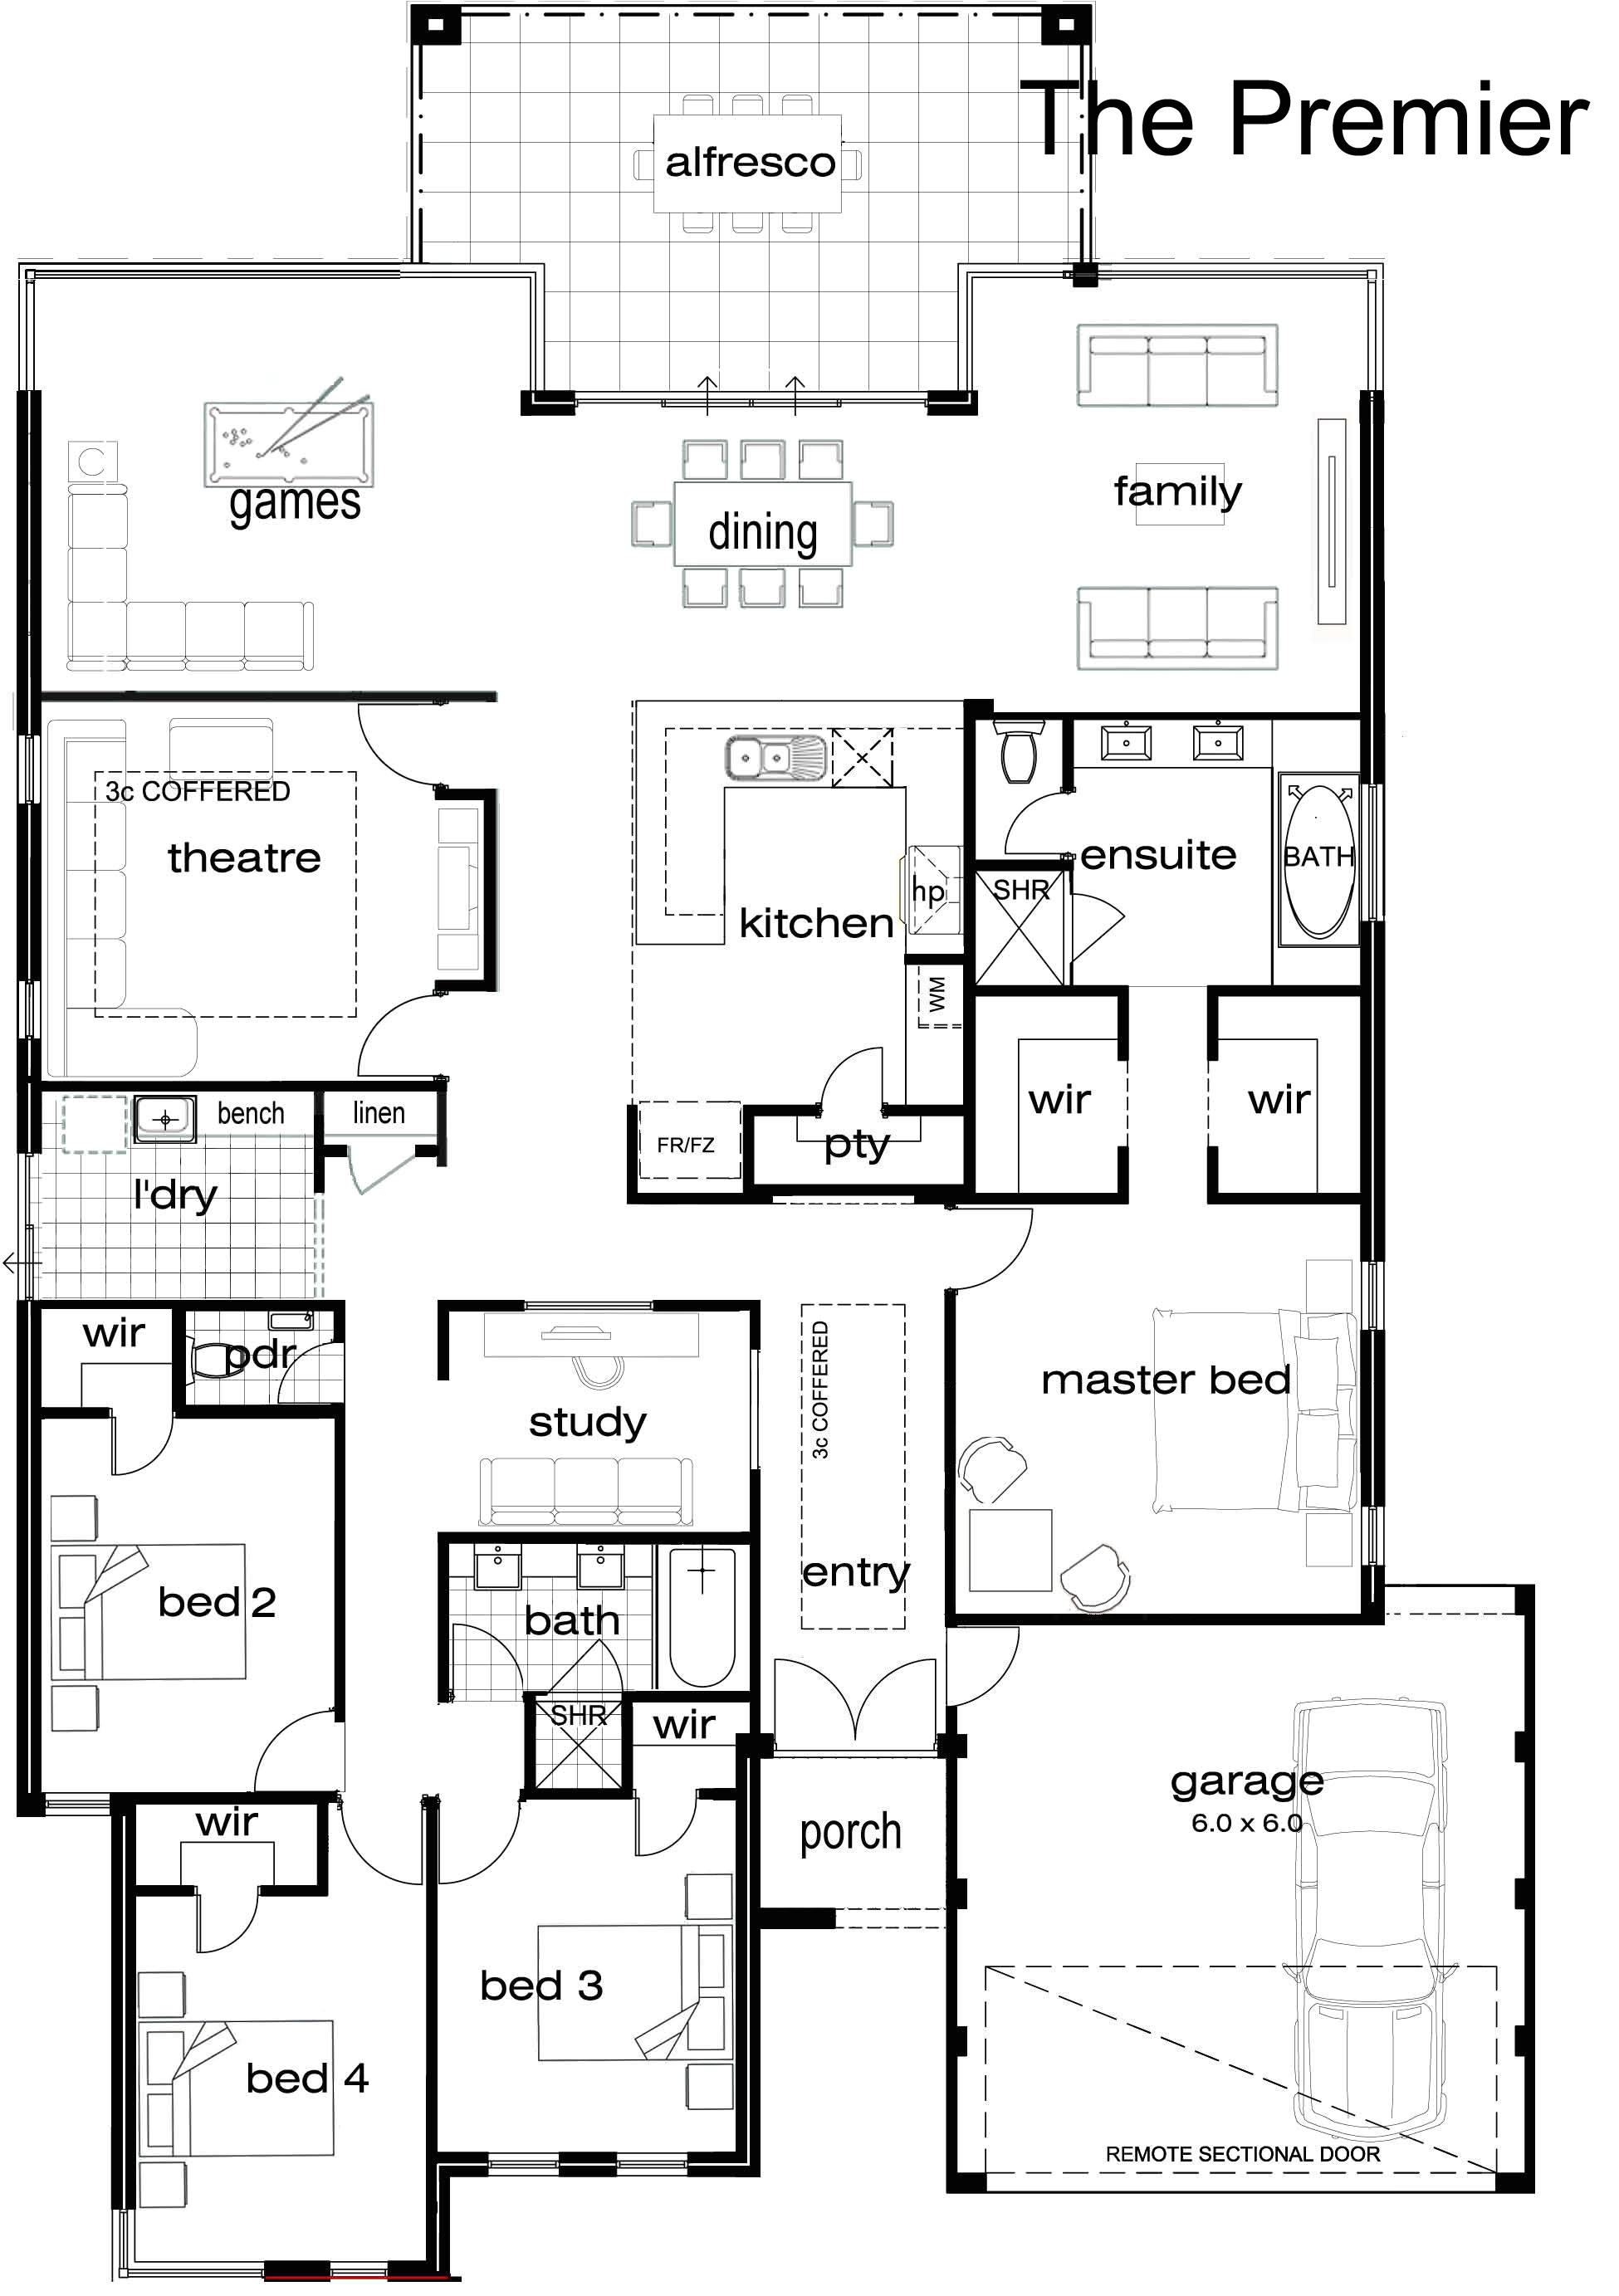 5 bedroom single story house plans